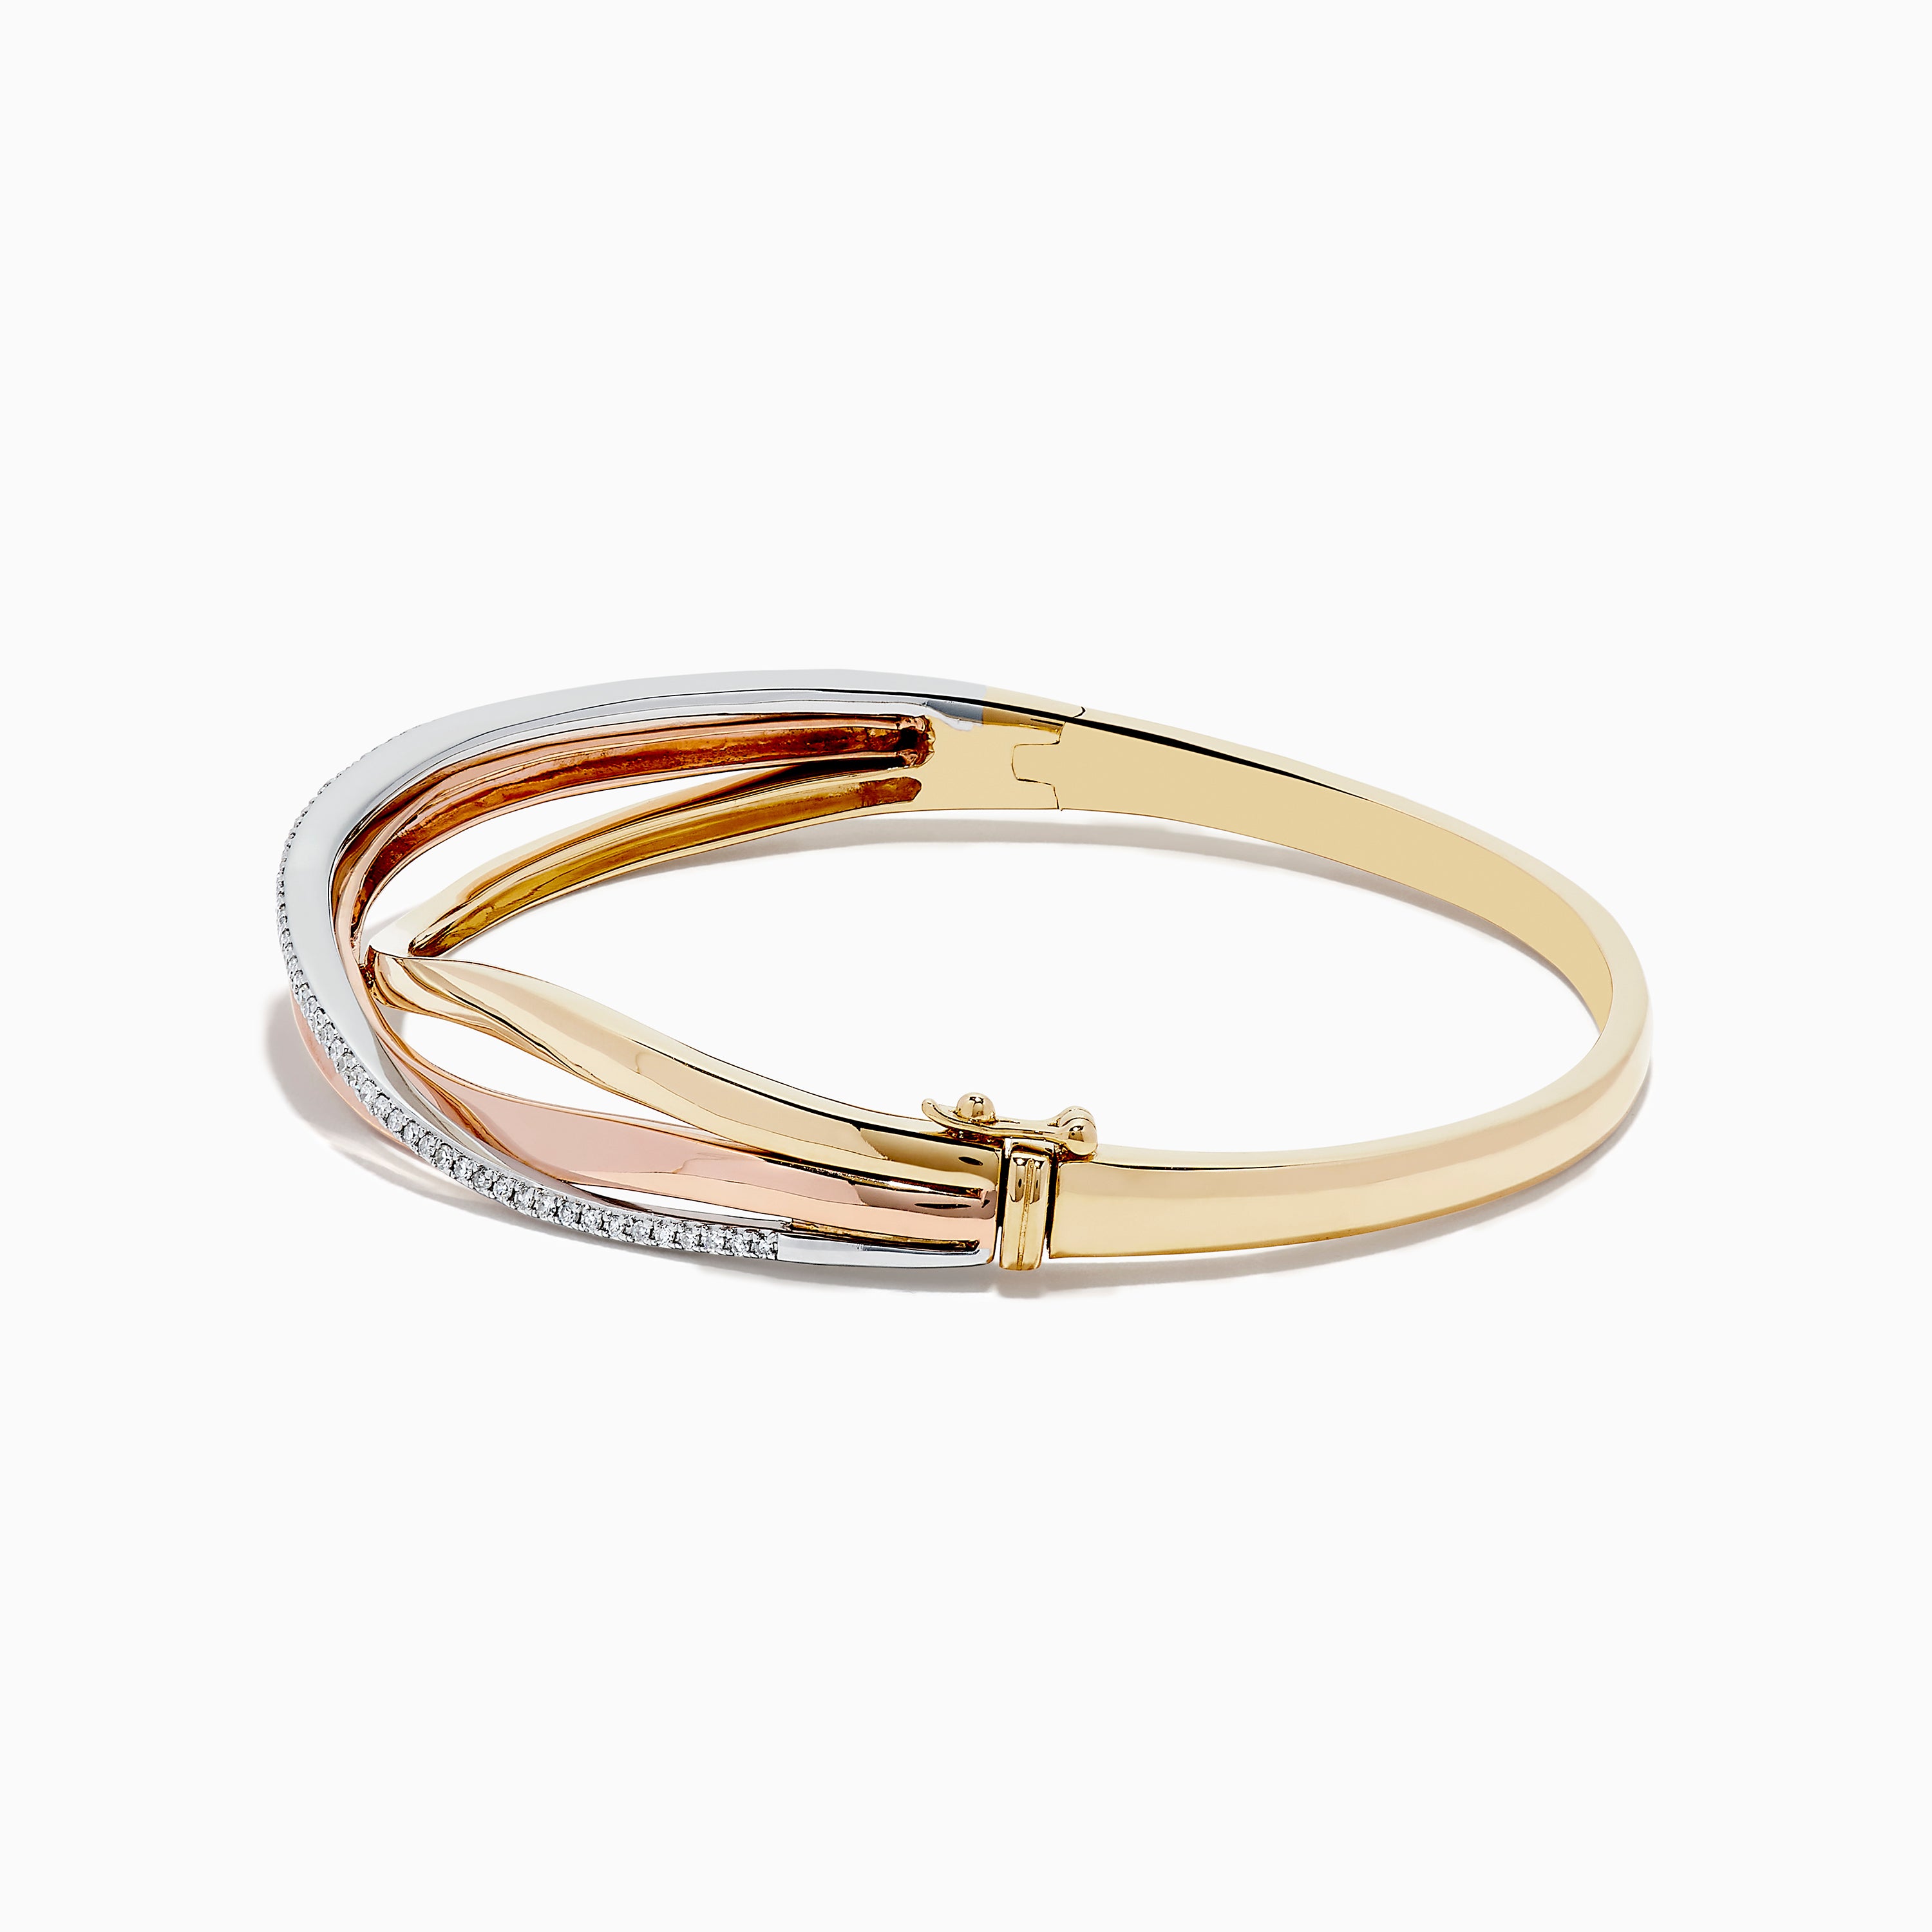 Fope Flex'it Panorama 18ct Rose Gold Bracelet with Three Colour Rondels